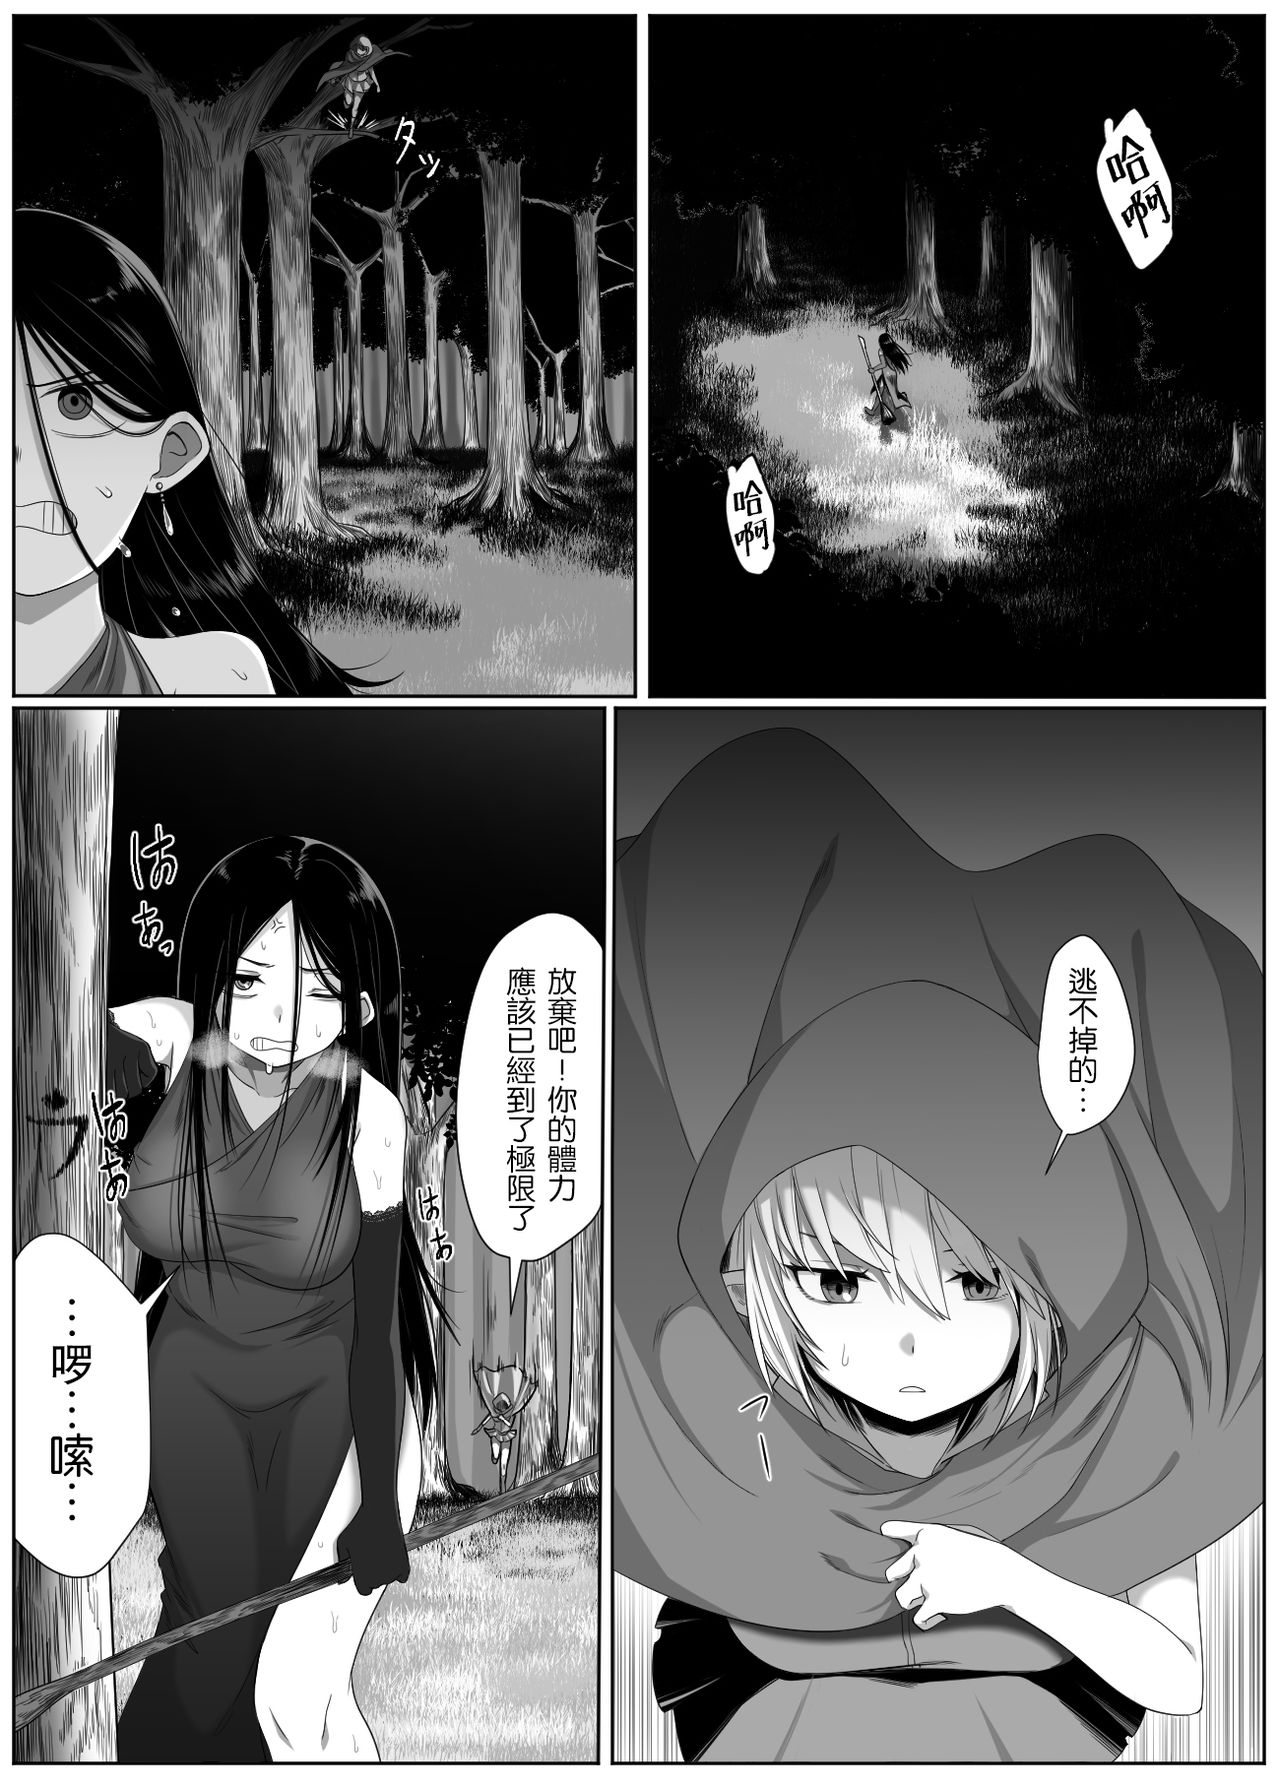 [Doukyara Doukoukai] Selfcest in the forest  [Chinese] [沒有漢化] [同キャラ同好会] Selfcest in the forest [中国翻訳]